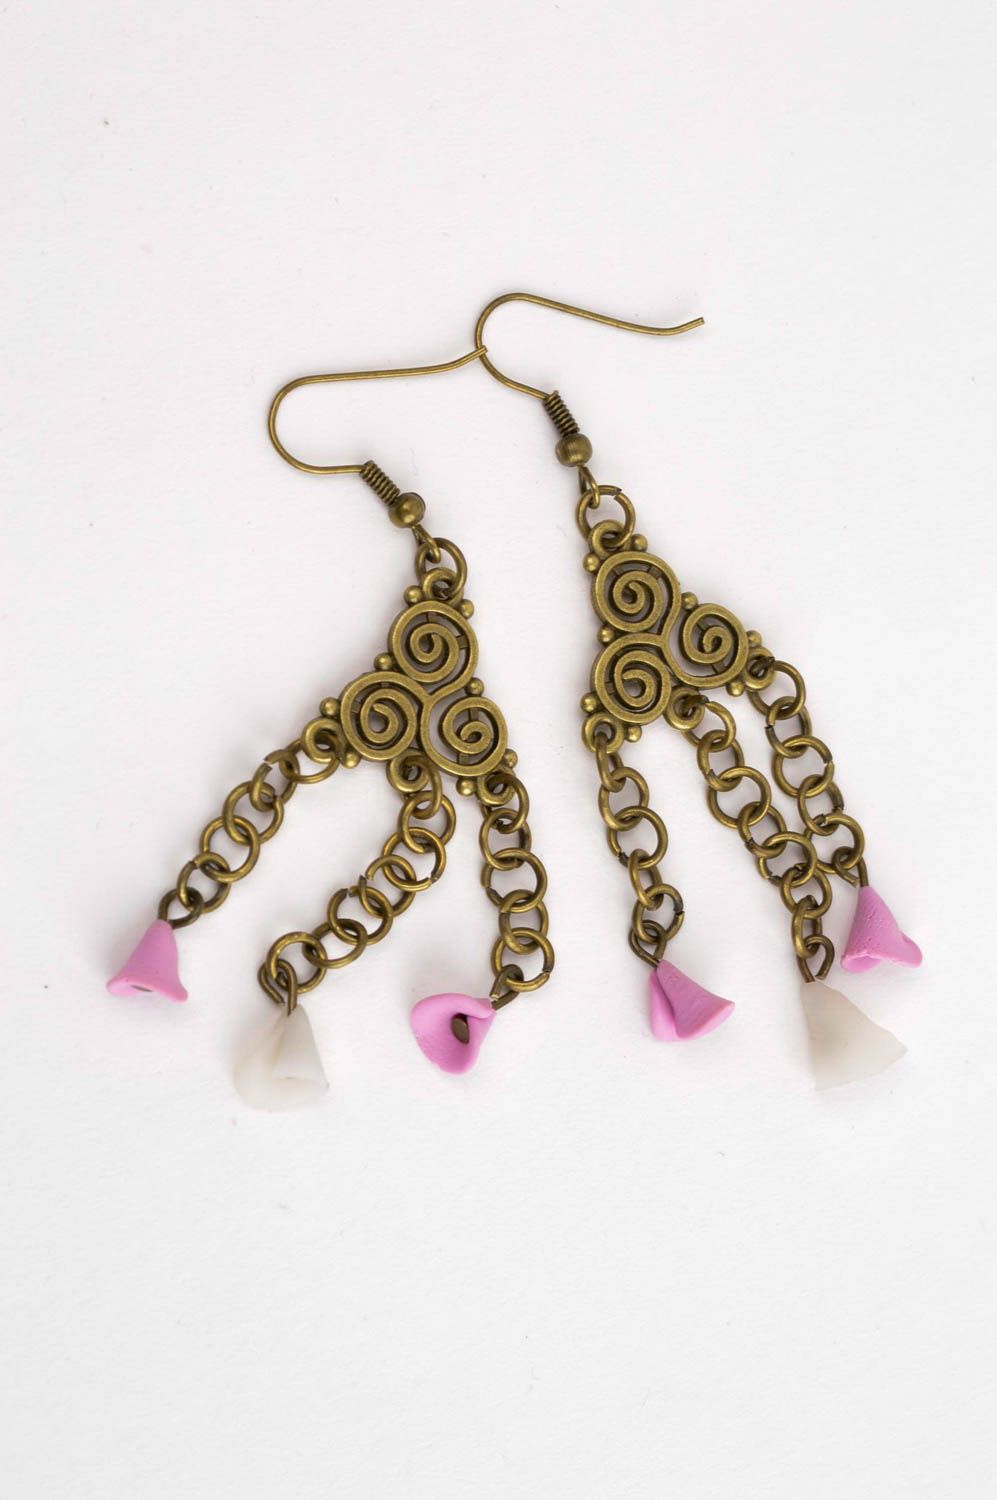 Handmade earrings designer accessory gift for her clay jewelry long earrings photo 2